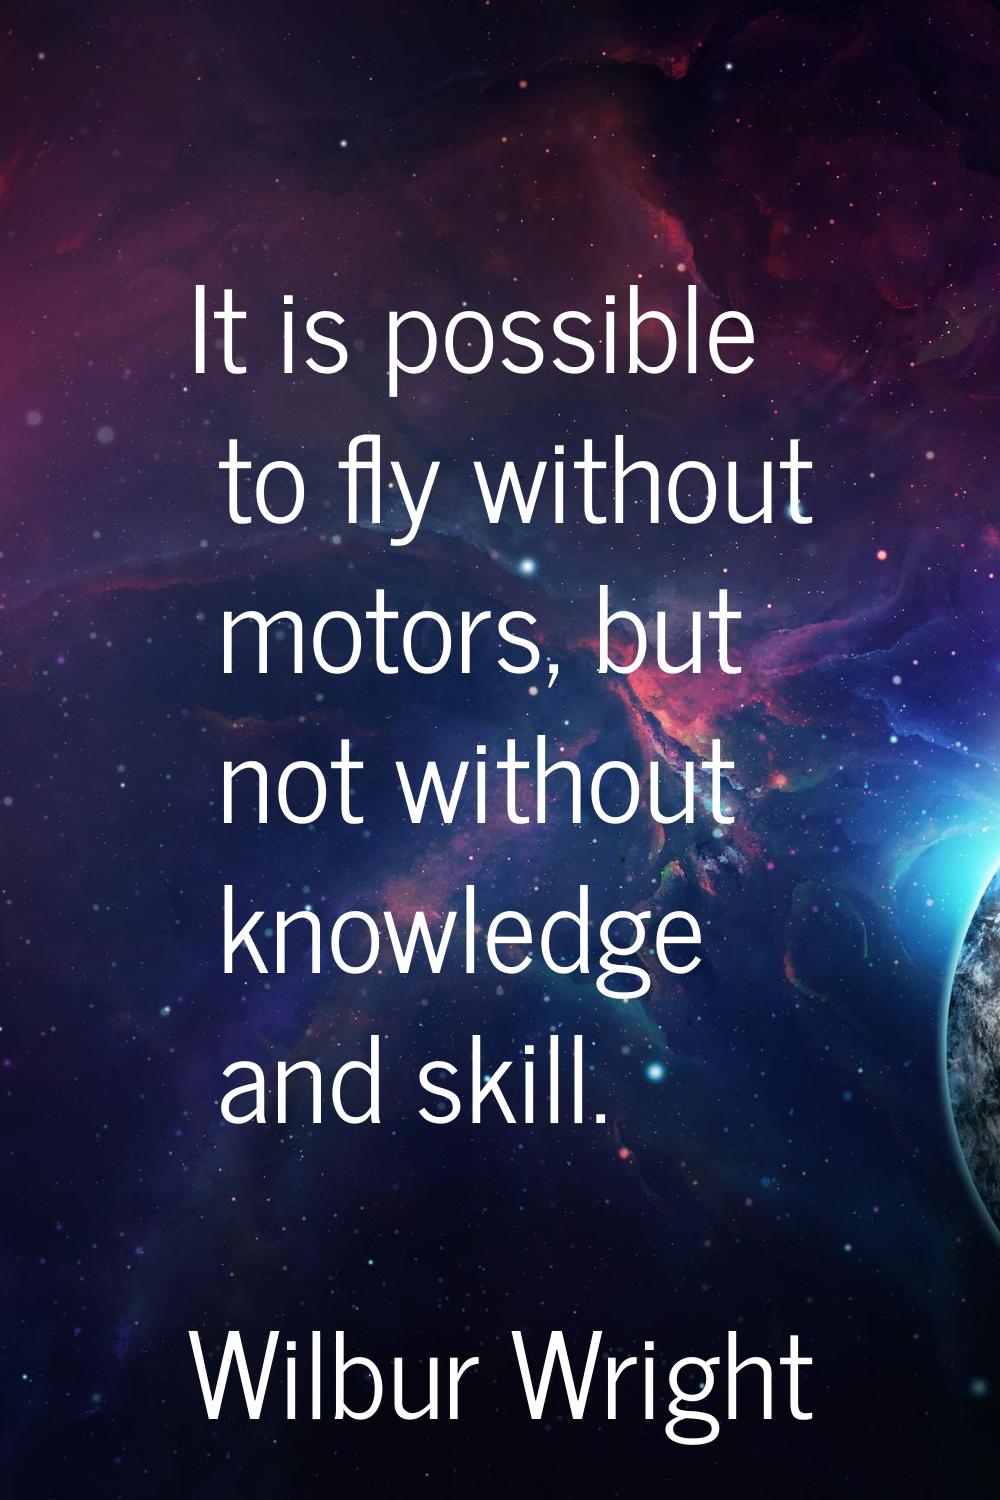 It is possible to fly without motors, but not without knowledge and skill.